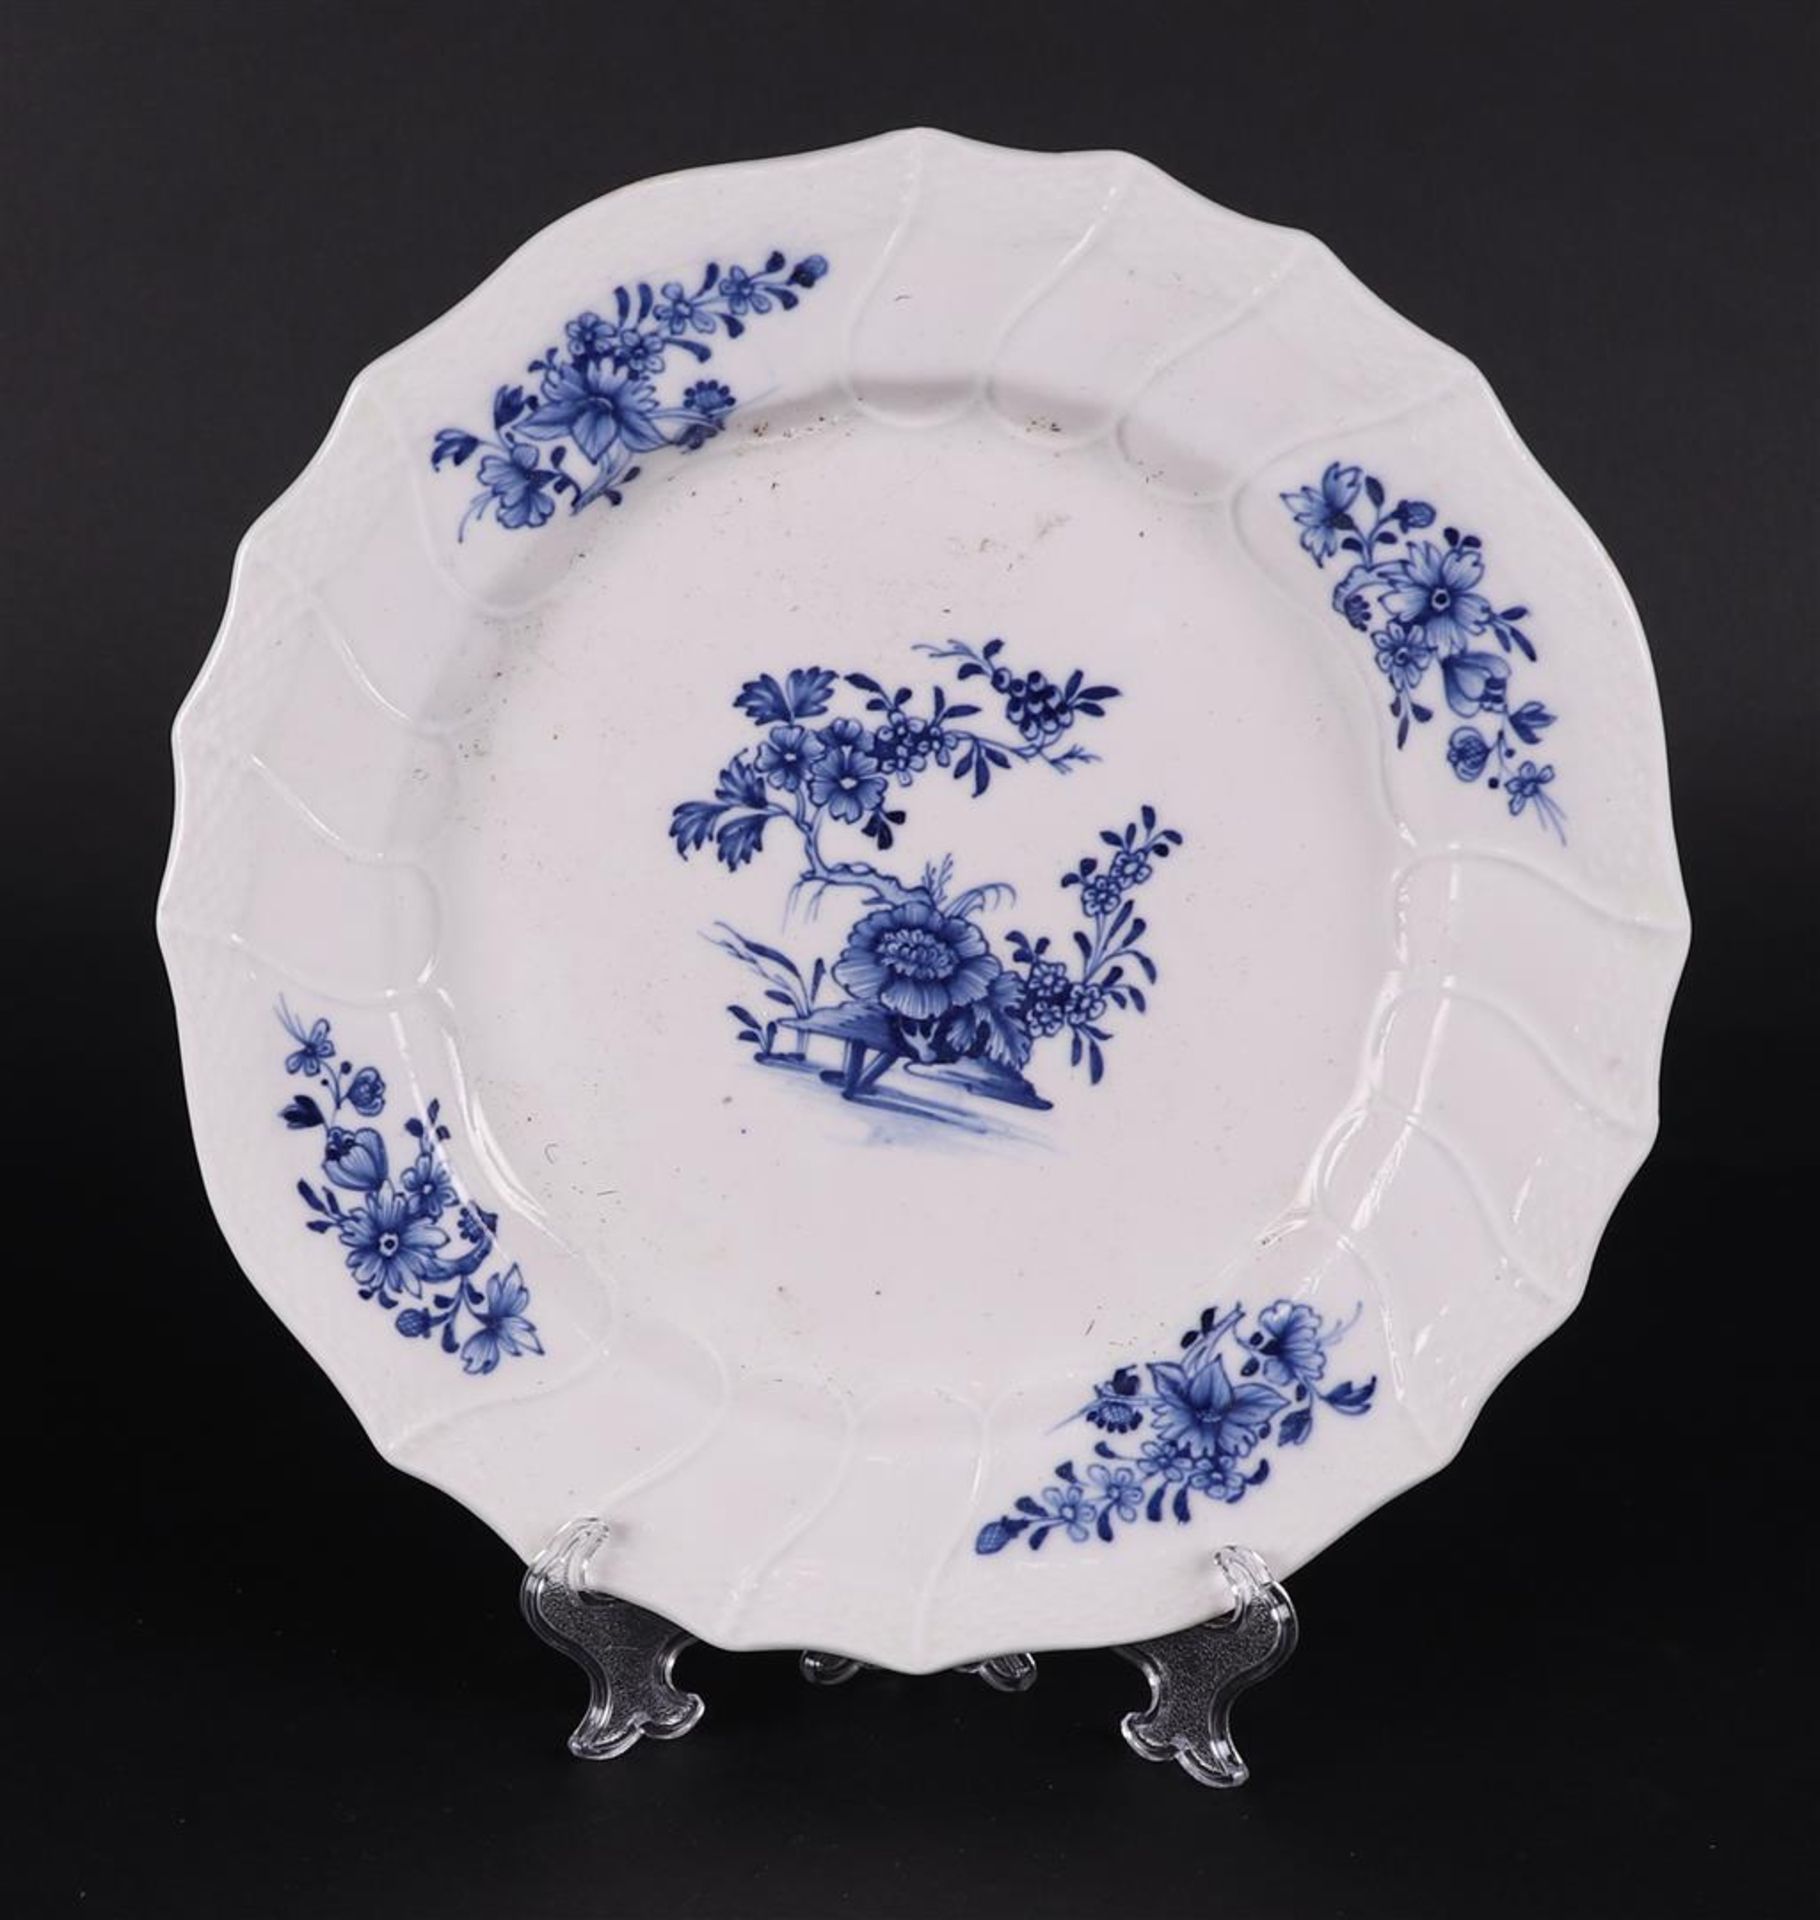 A porcelain plate decorated with flowers. Tournai, 18th century.